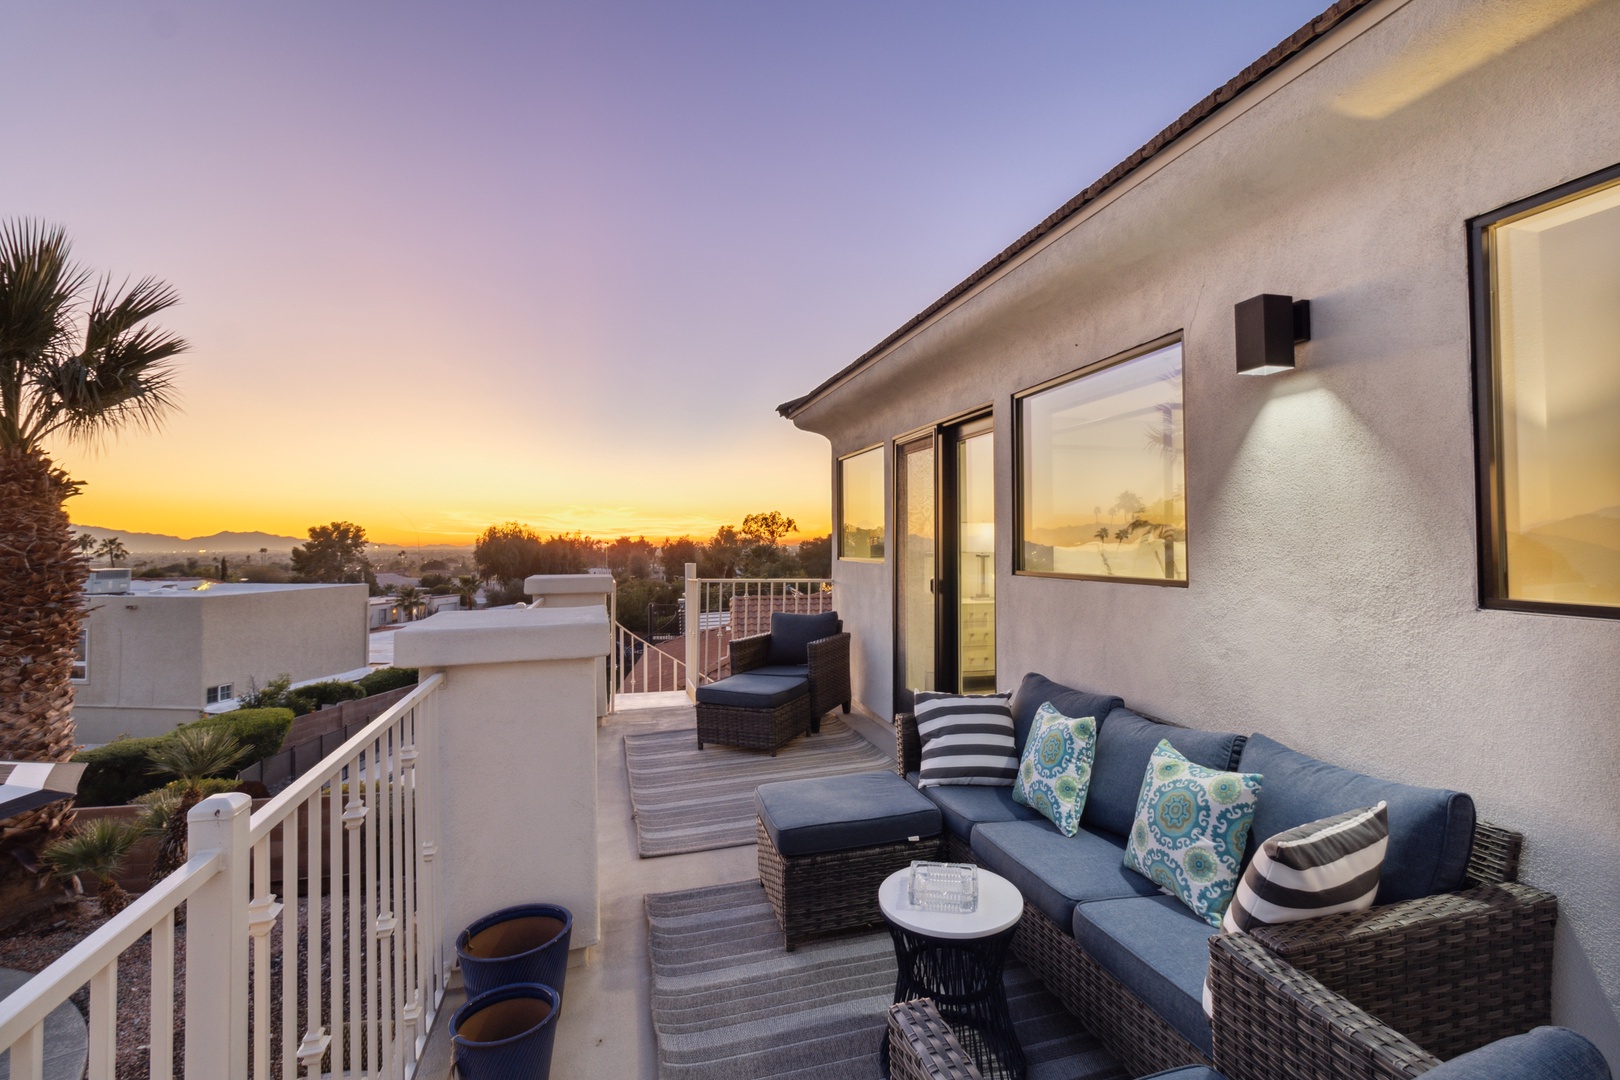 Phoenix Vacation Rentals, Majestic Mountain Views at Piestewa Peak Paradise - You'll be able to sit on the deck and enjoy some of the most beautiful Arizona Sunsets while sipping your cocktail